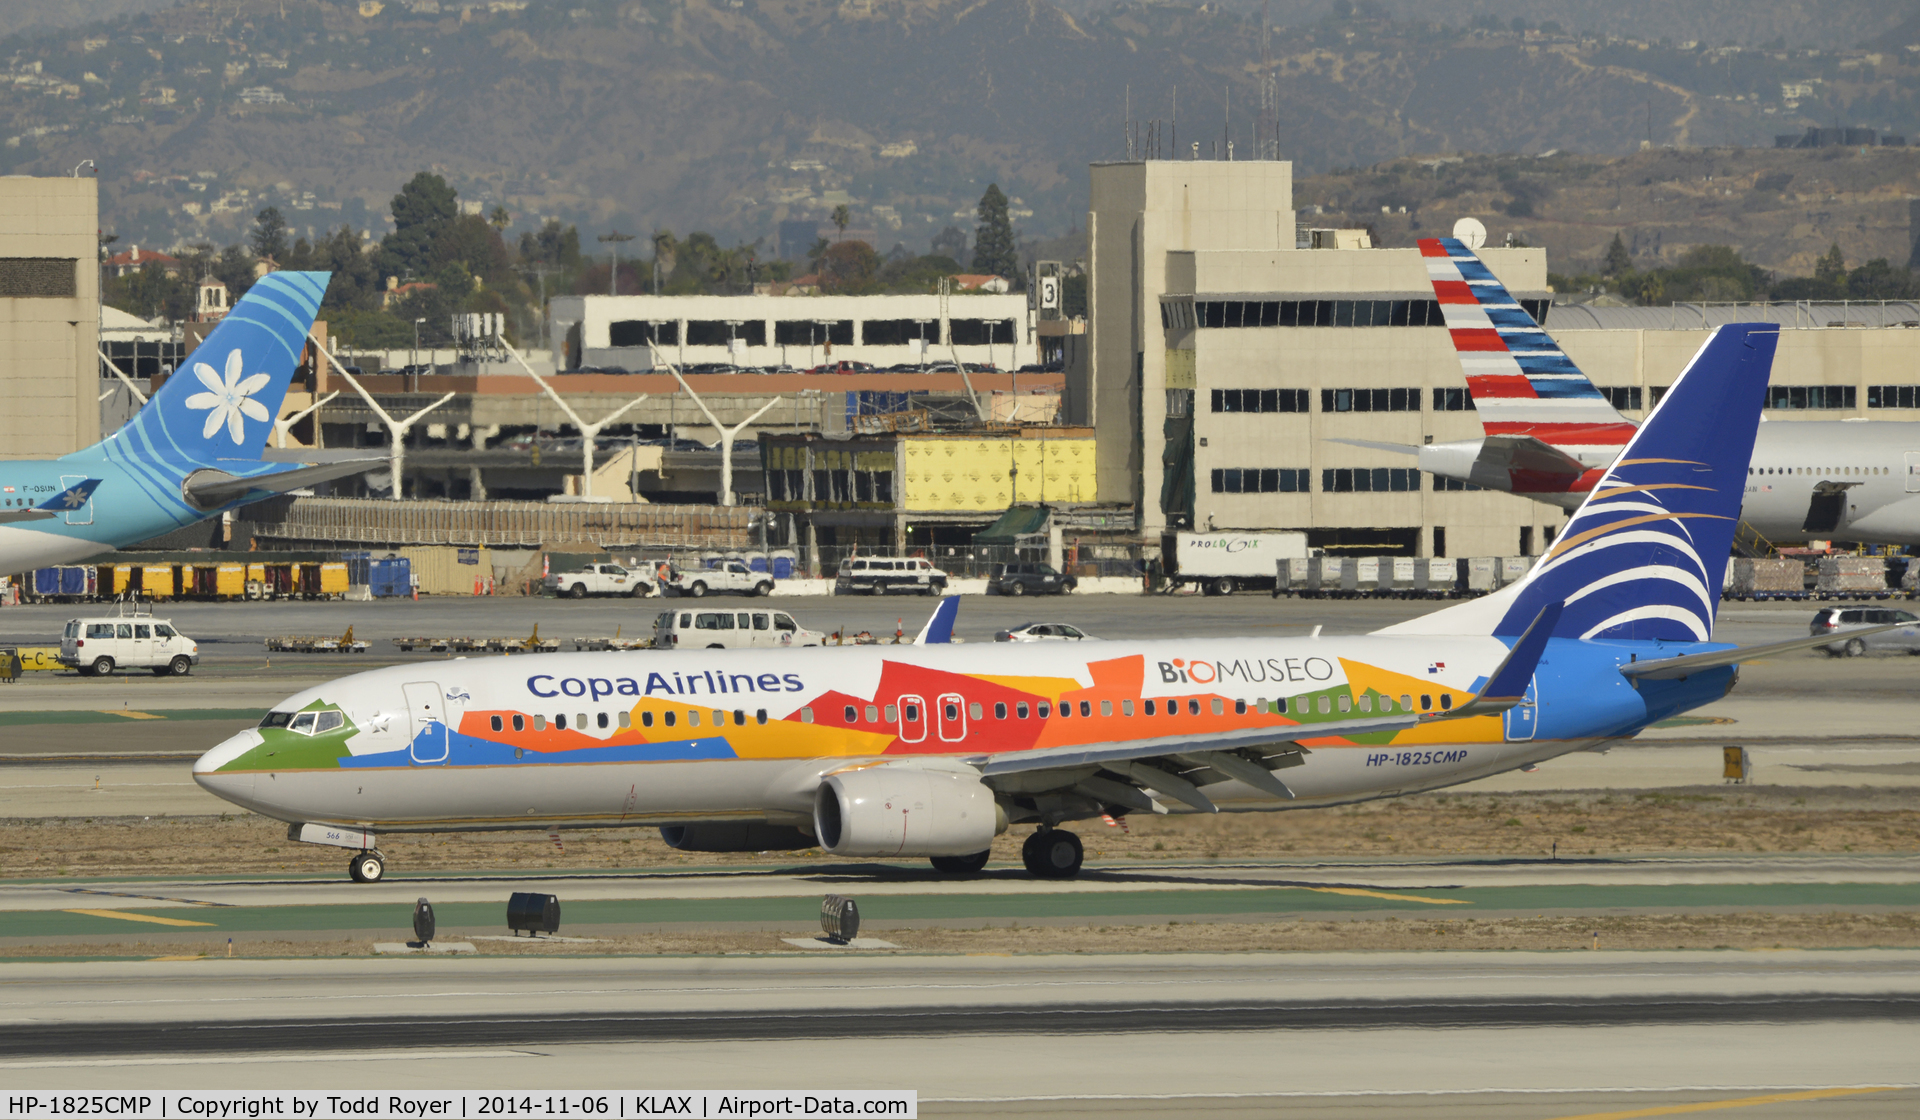 HP-1825CMP, 2012 Boeing 737-8V3 C/N 40780, Taxiing to gate at LAX